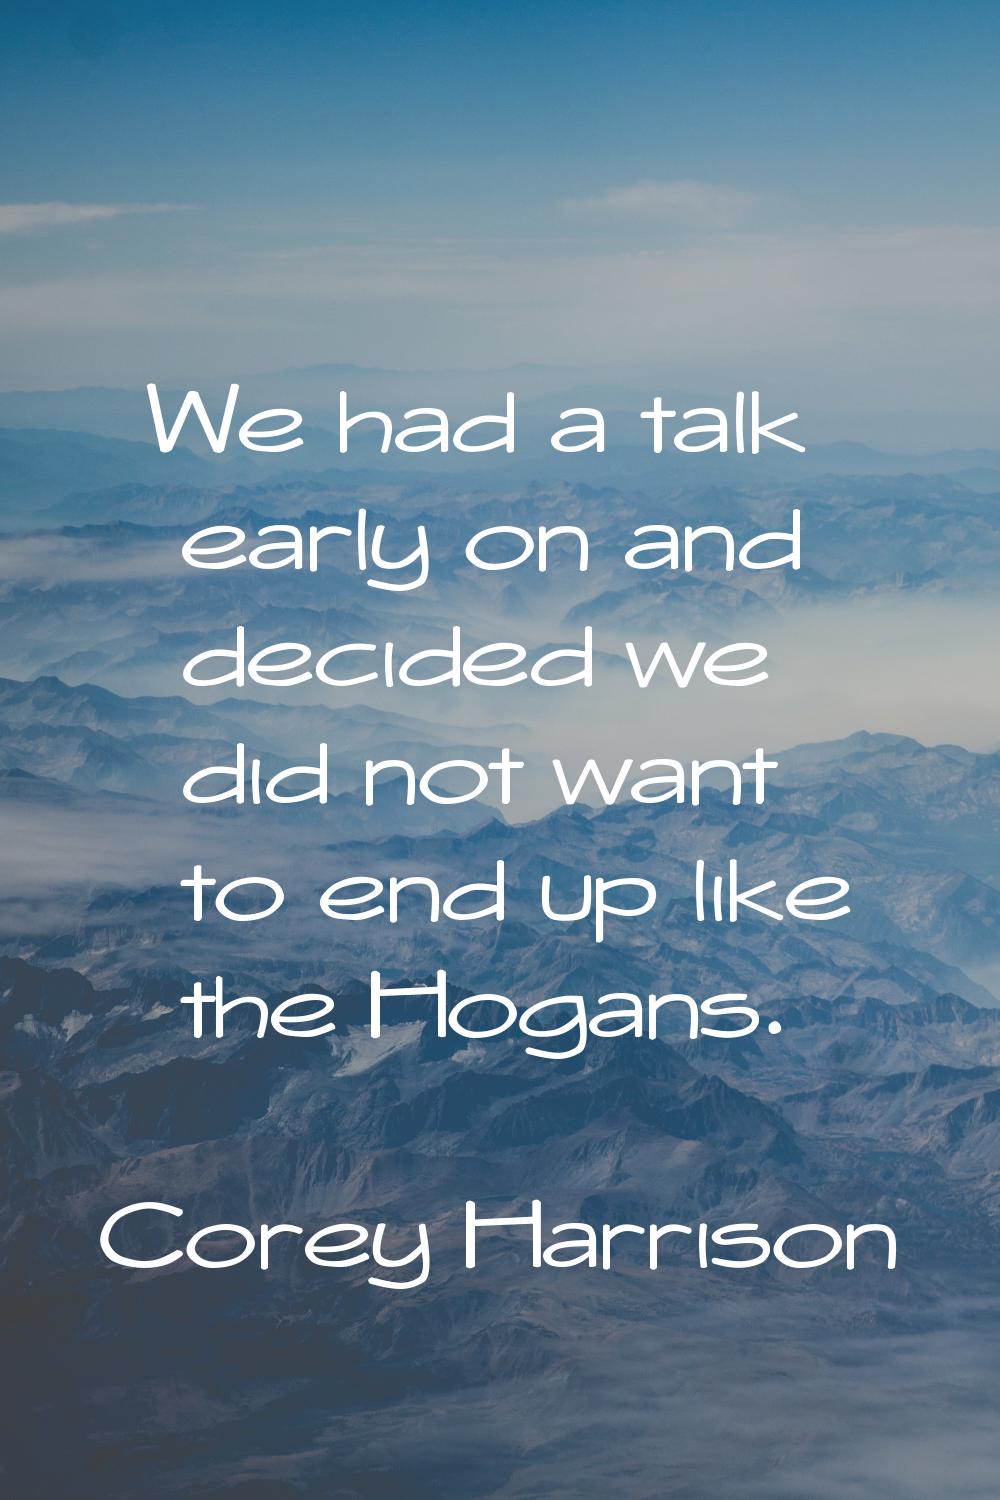 We had a talk early on and decided we did not want to end up like the Hogans.